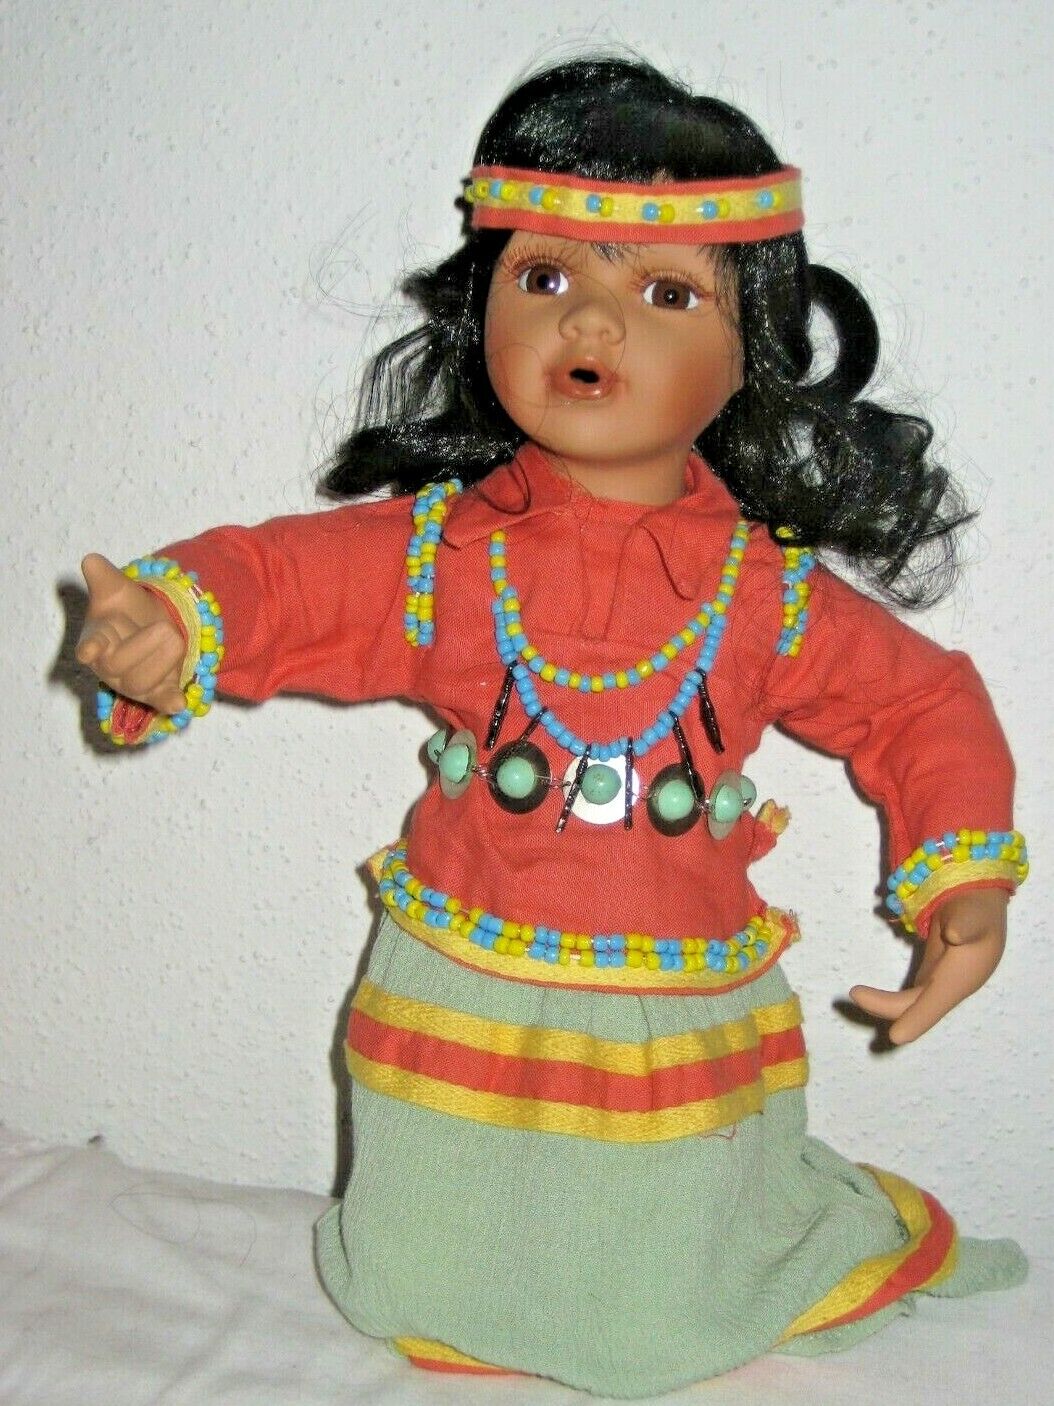 Southwest Indigenous Girl Doll, Brown Eyes, Wearing Jewelry, Head Band and Belt